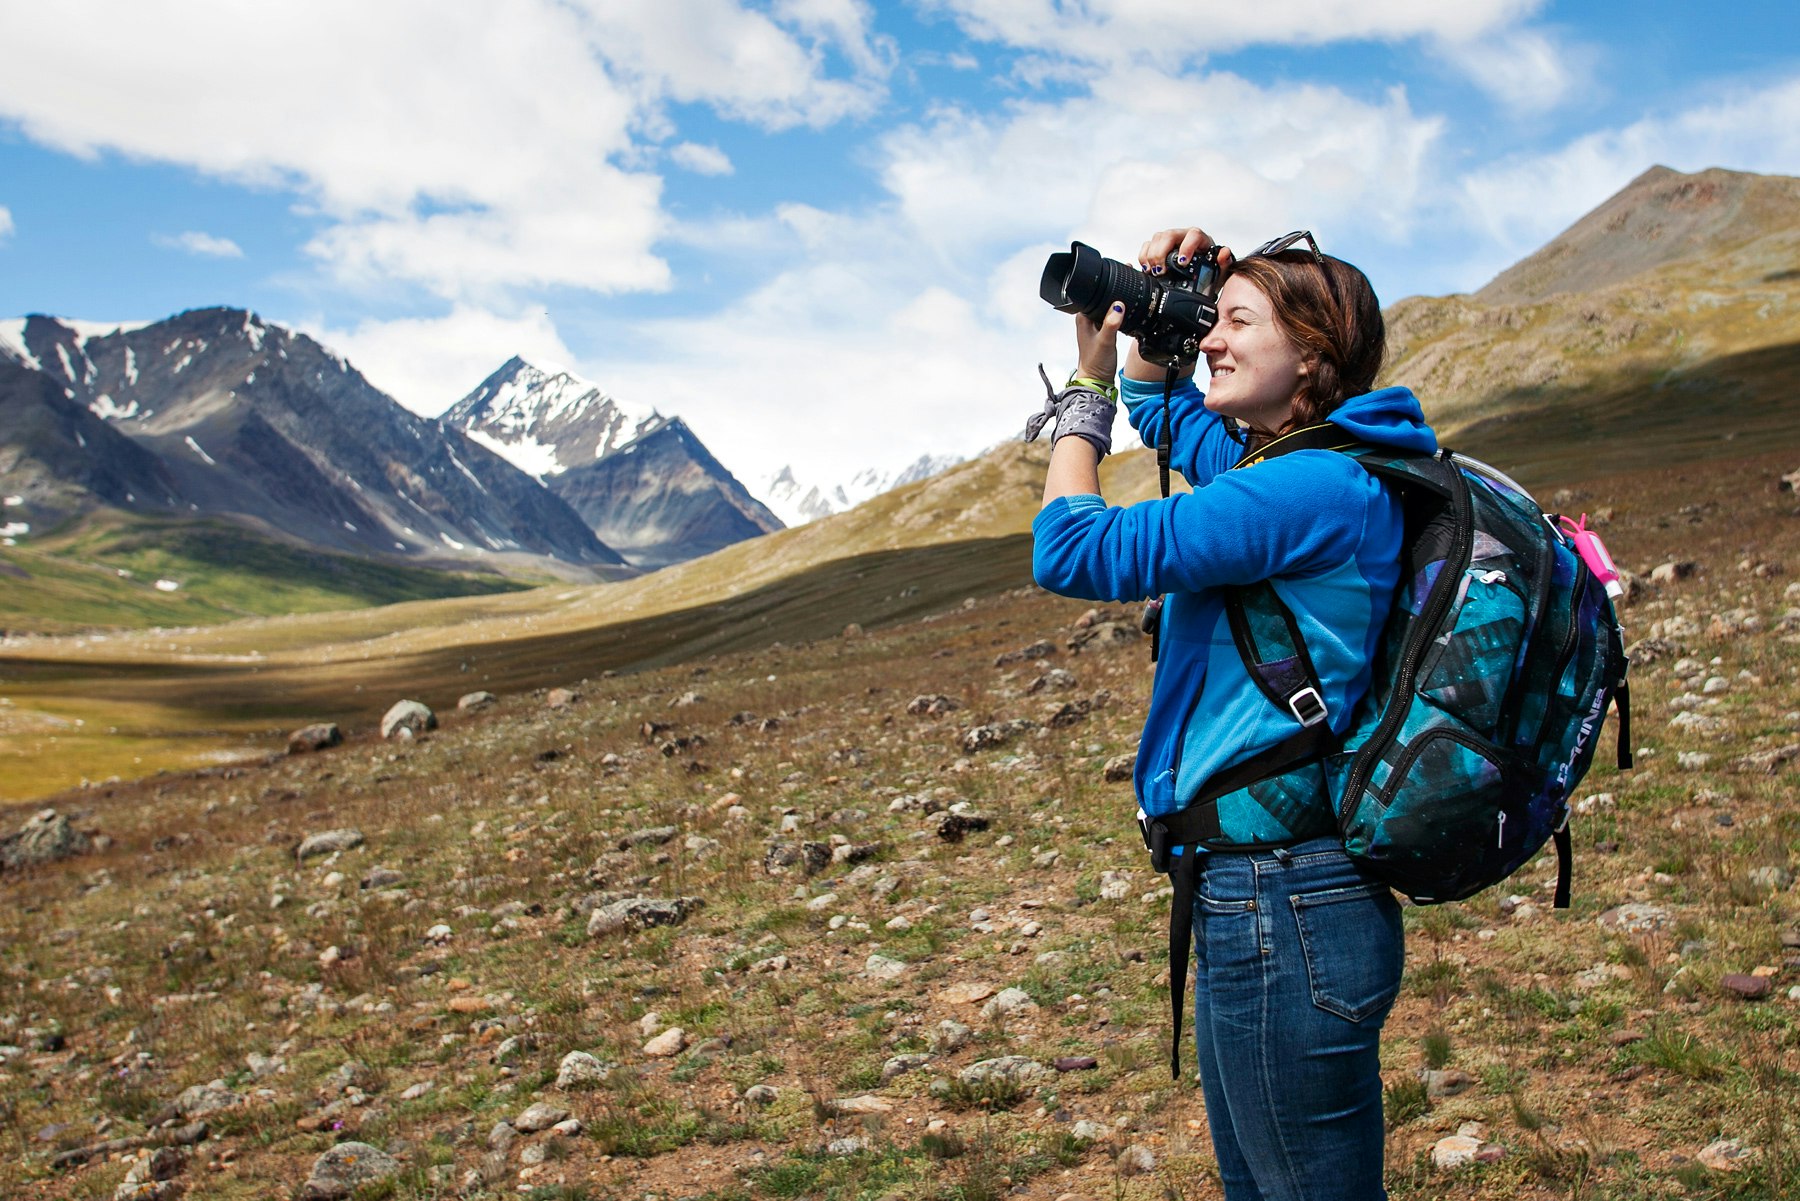 How to Take Amazing Travel Photos: 13 Best Tips